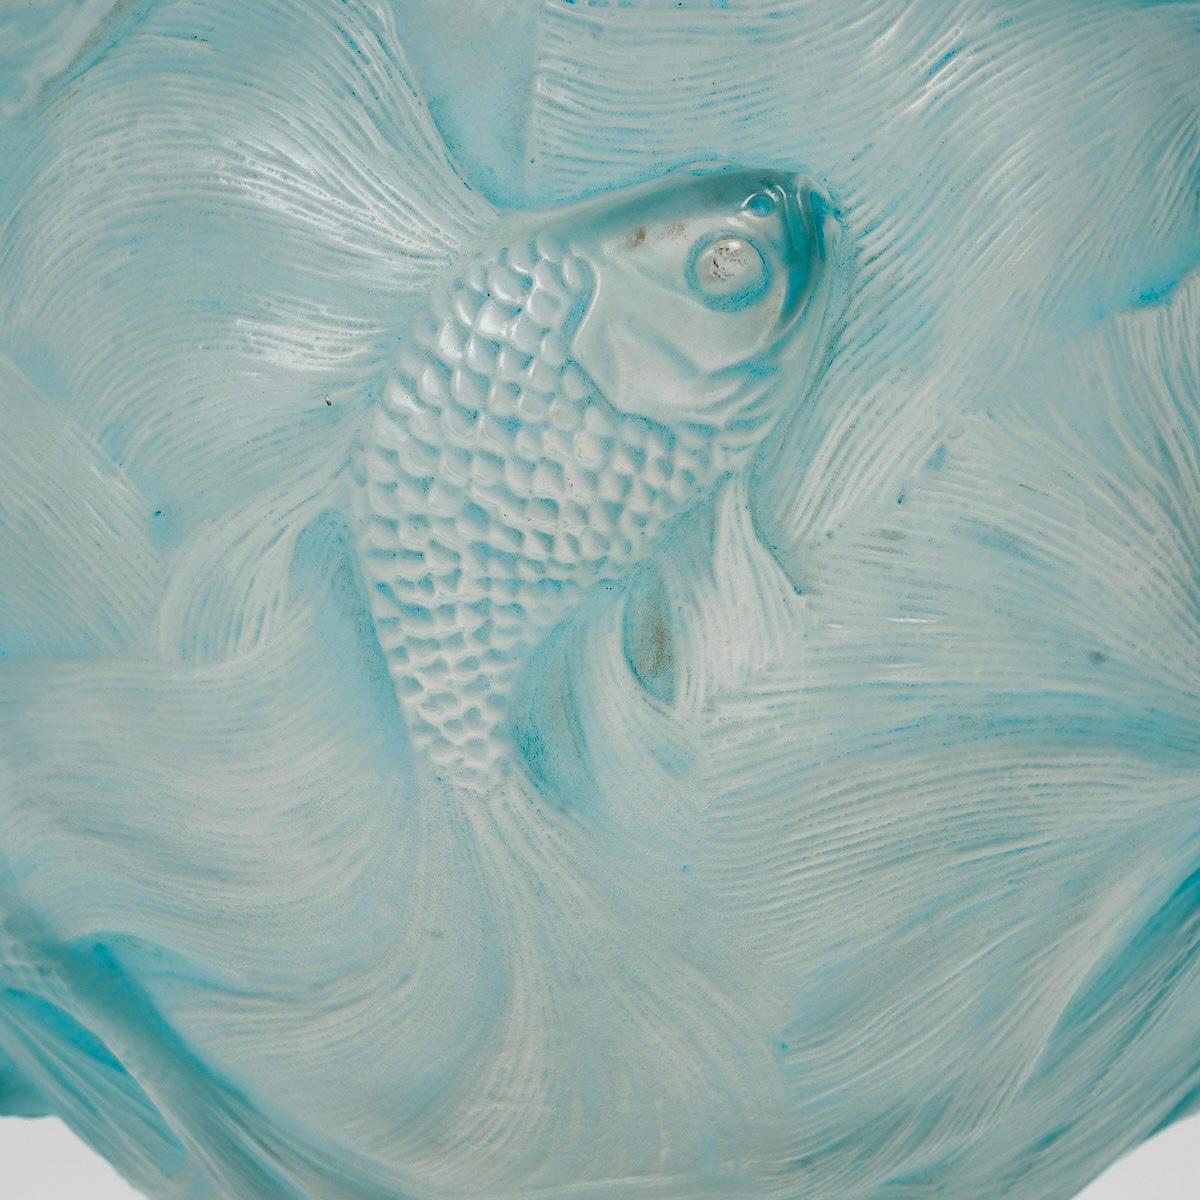 French 1924 René Lalique Vase Formose Frosted Glass Blue Patina, Fishes For Sale